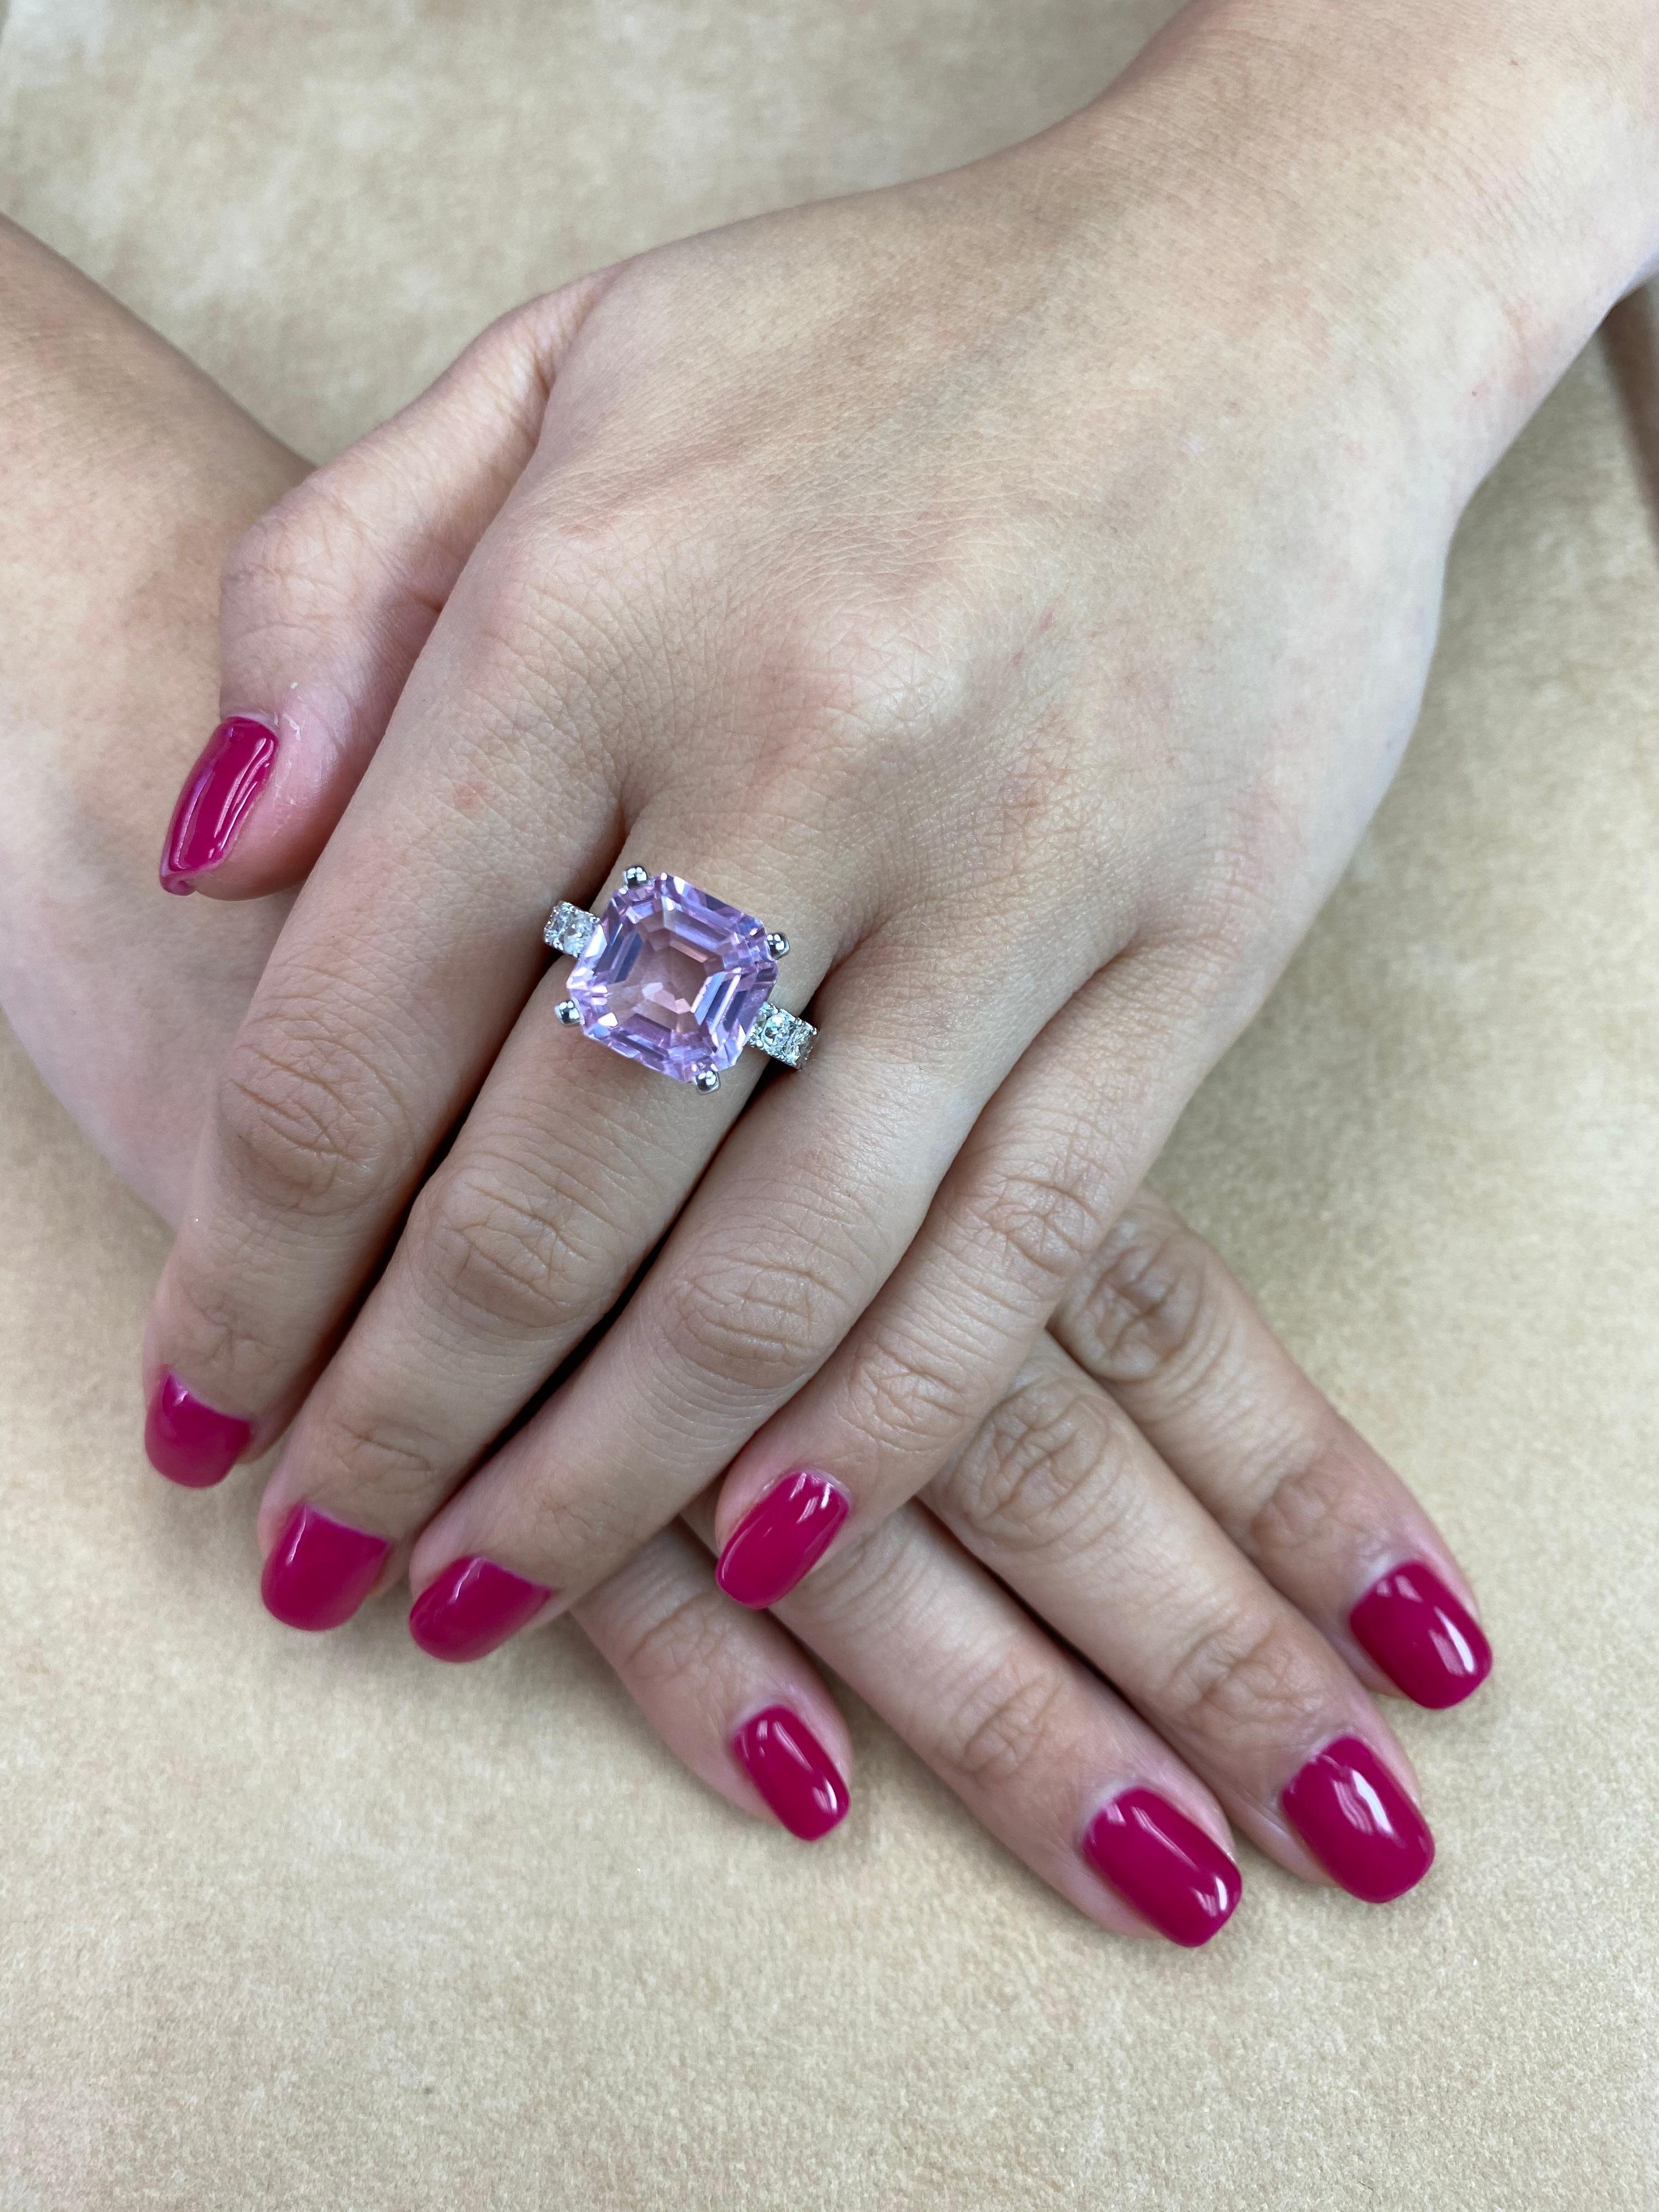 Ask for a video! Here is a beautiful Kunzite and diamond cocktail ring. Oversized at just over 10cts. The ring is set in 18k white gold and diamonds. There are 10 diamonds totaling 1.09 cts on the shanks of the ring. Each side diamond comes out to